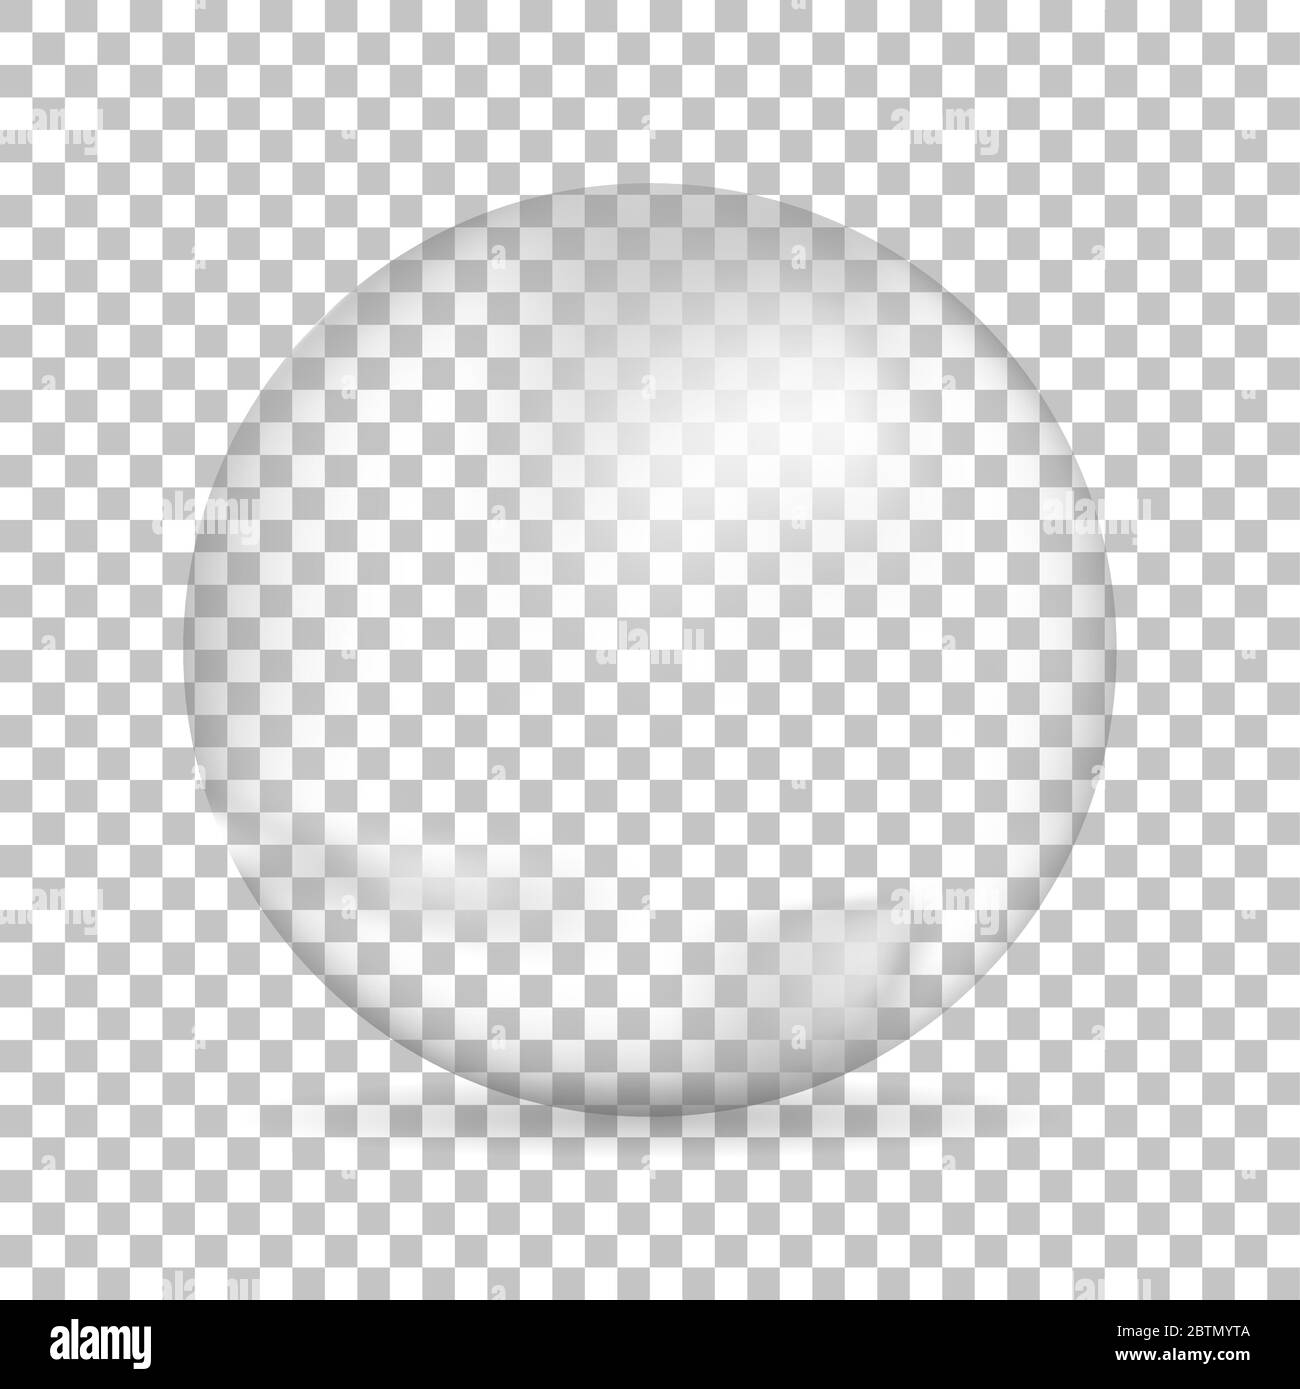 Water bubble with shadow on isolated background, vector illustration Stock Vector